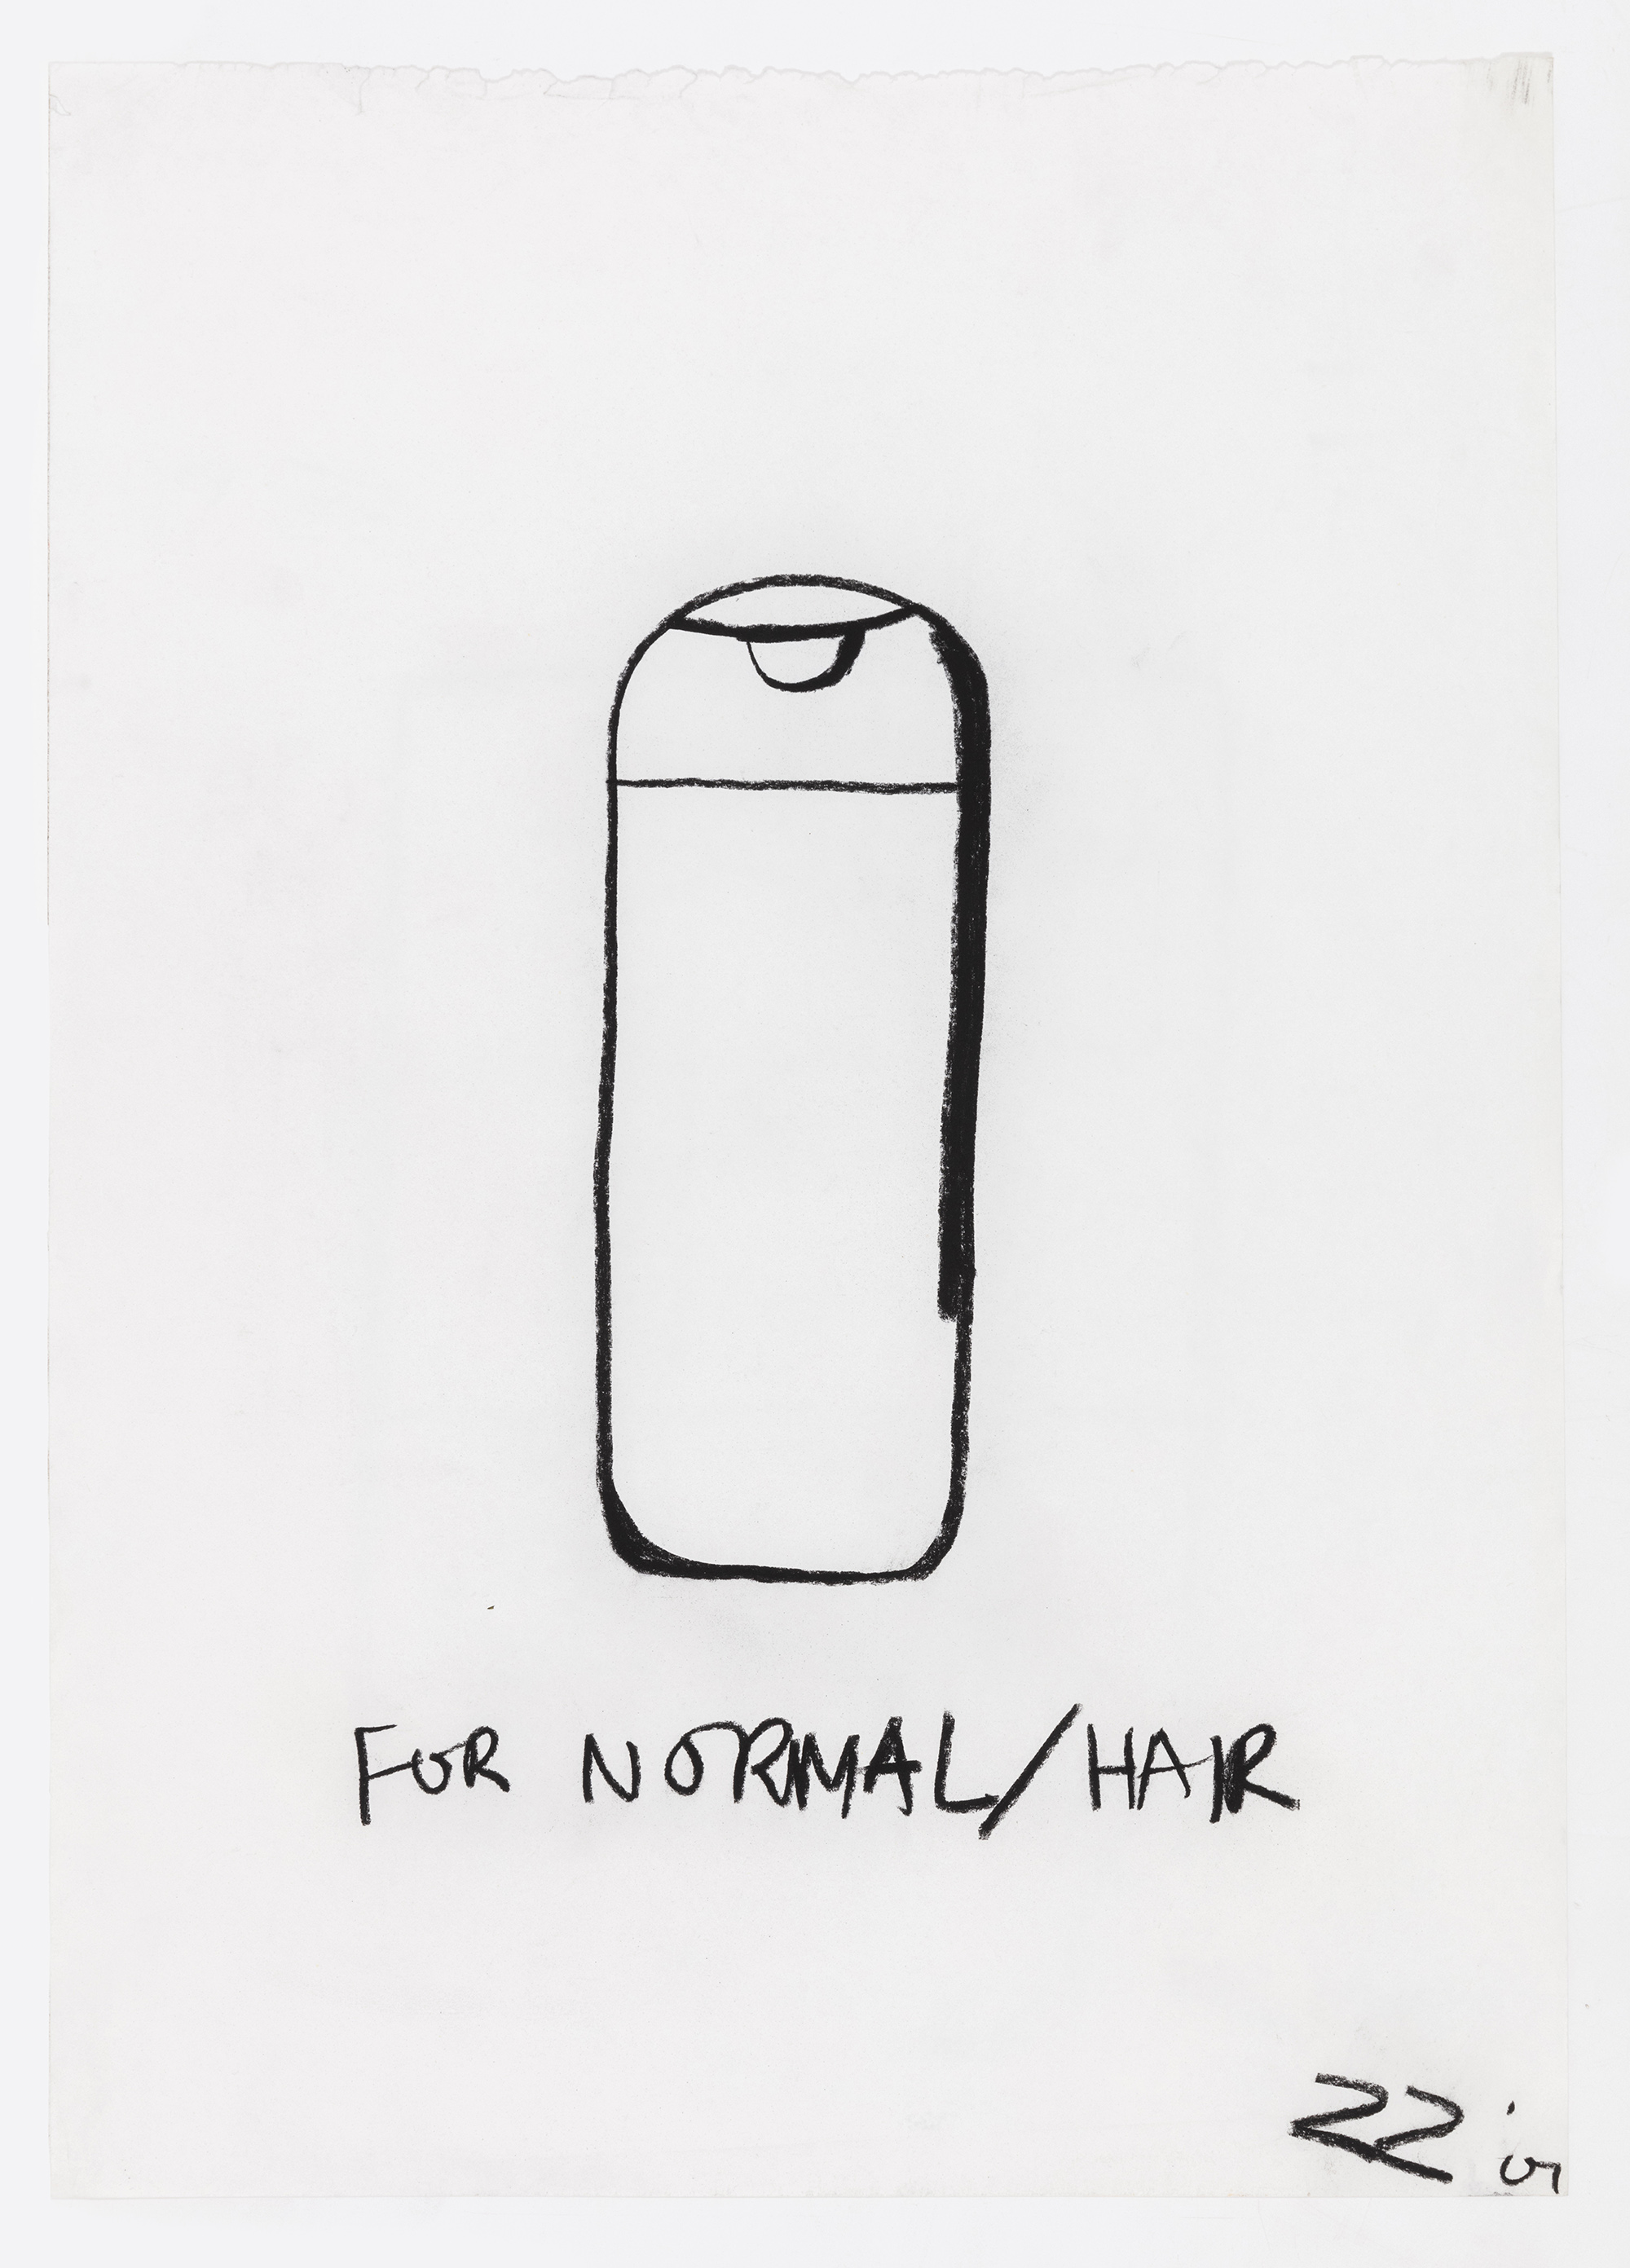  - FOR NORMAL/HAIR, 2001